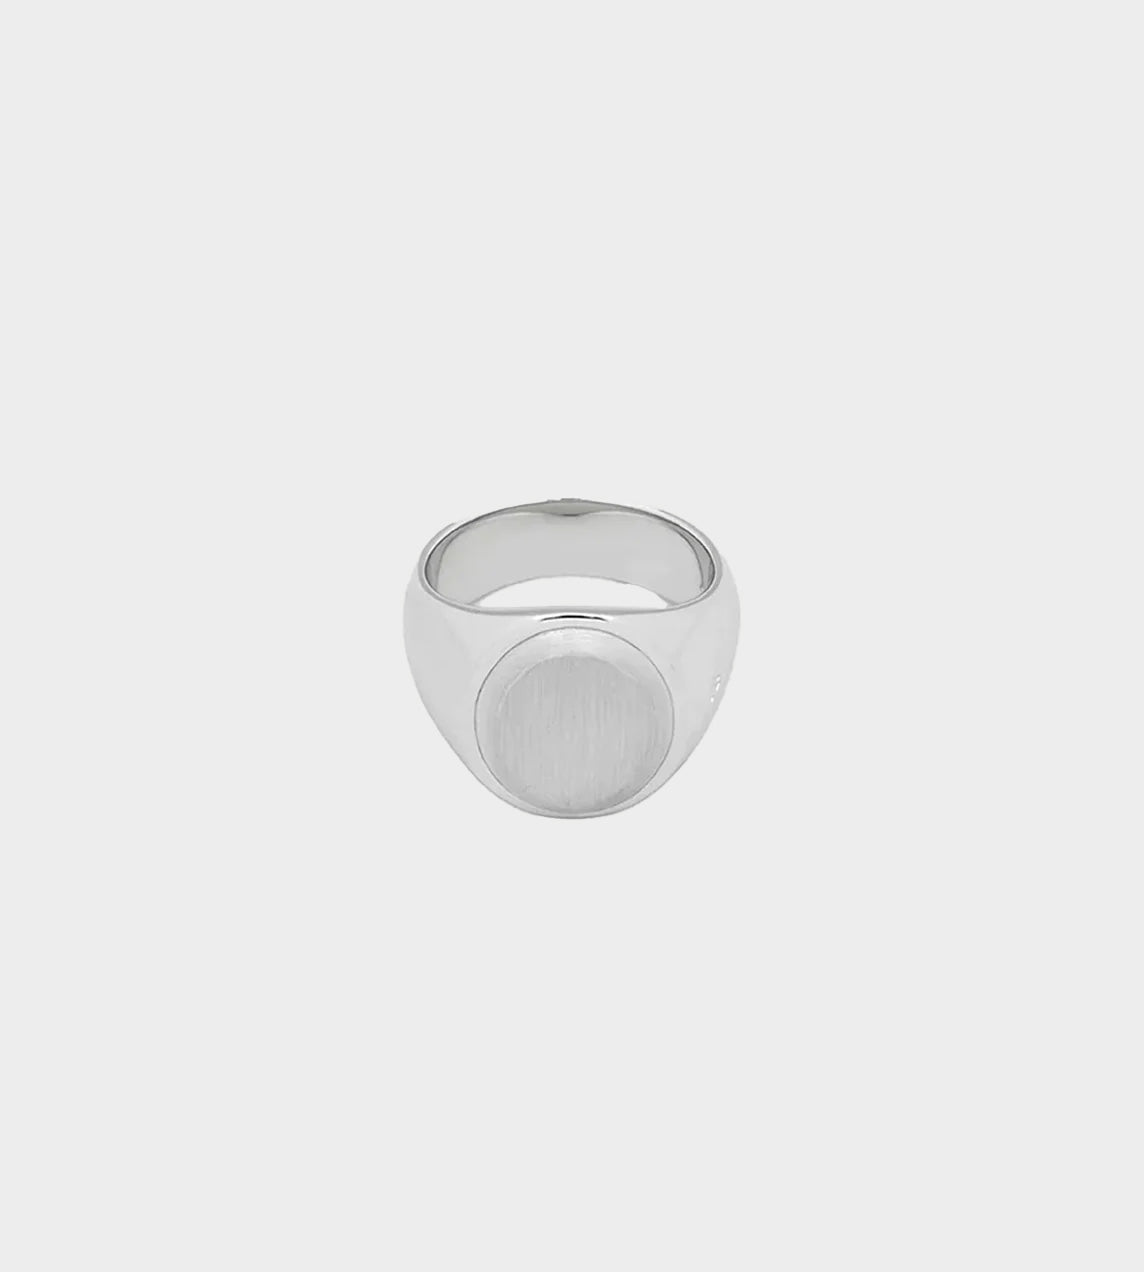 Tom Wood - Large Oval Silver Top Signet Ring